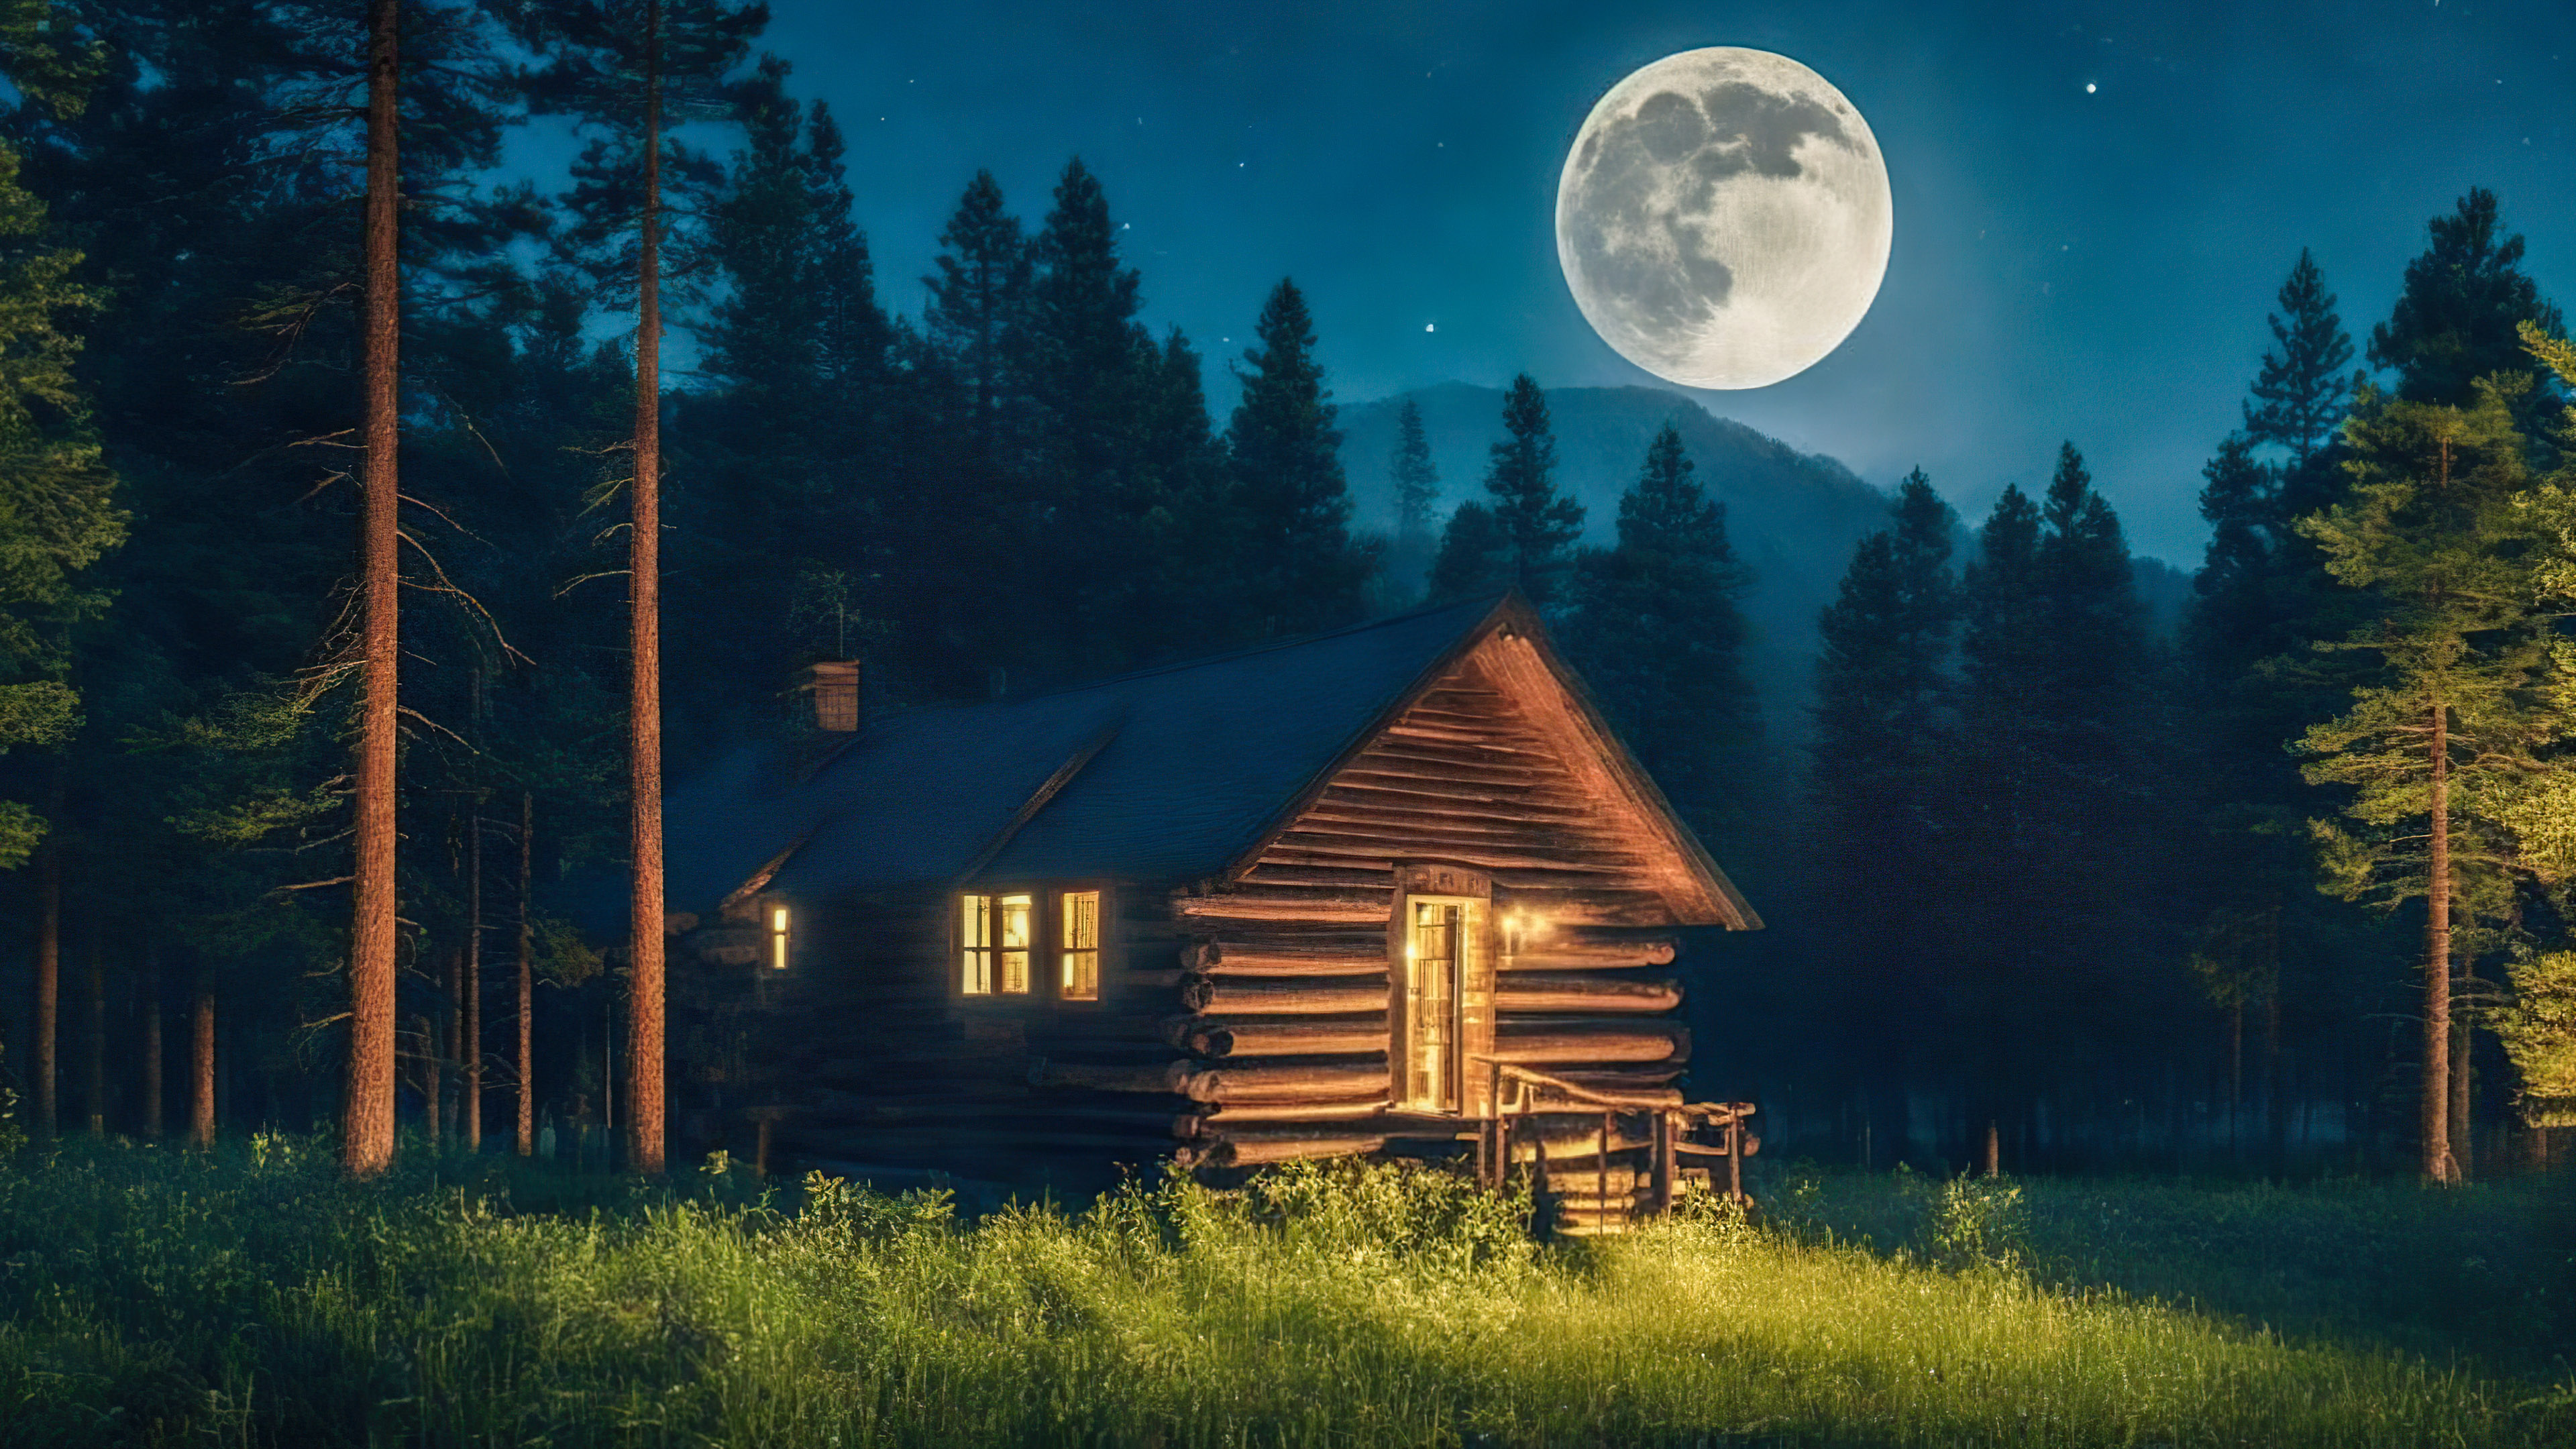 Discover the tranquility of our beautiful scenery wallpapers for PC, featuring a cozy cabin nestled among pine trees, bathed in the gentle light of a full moon.